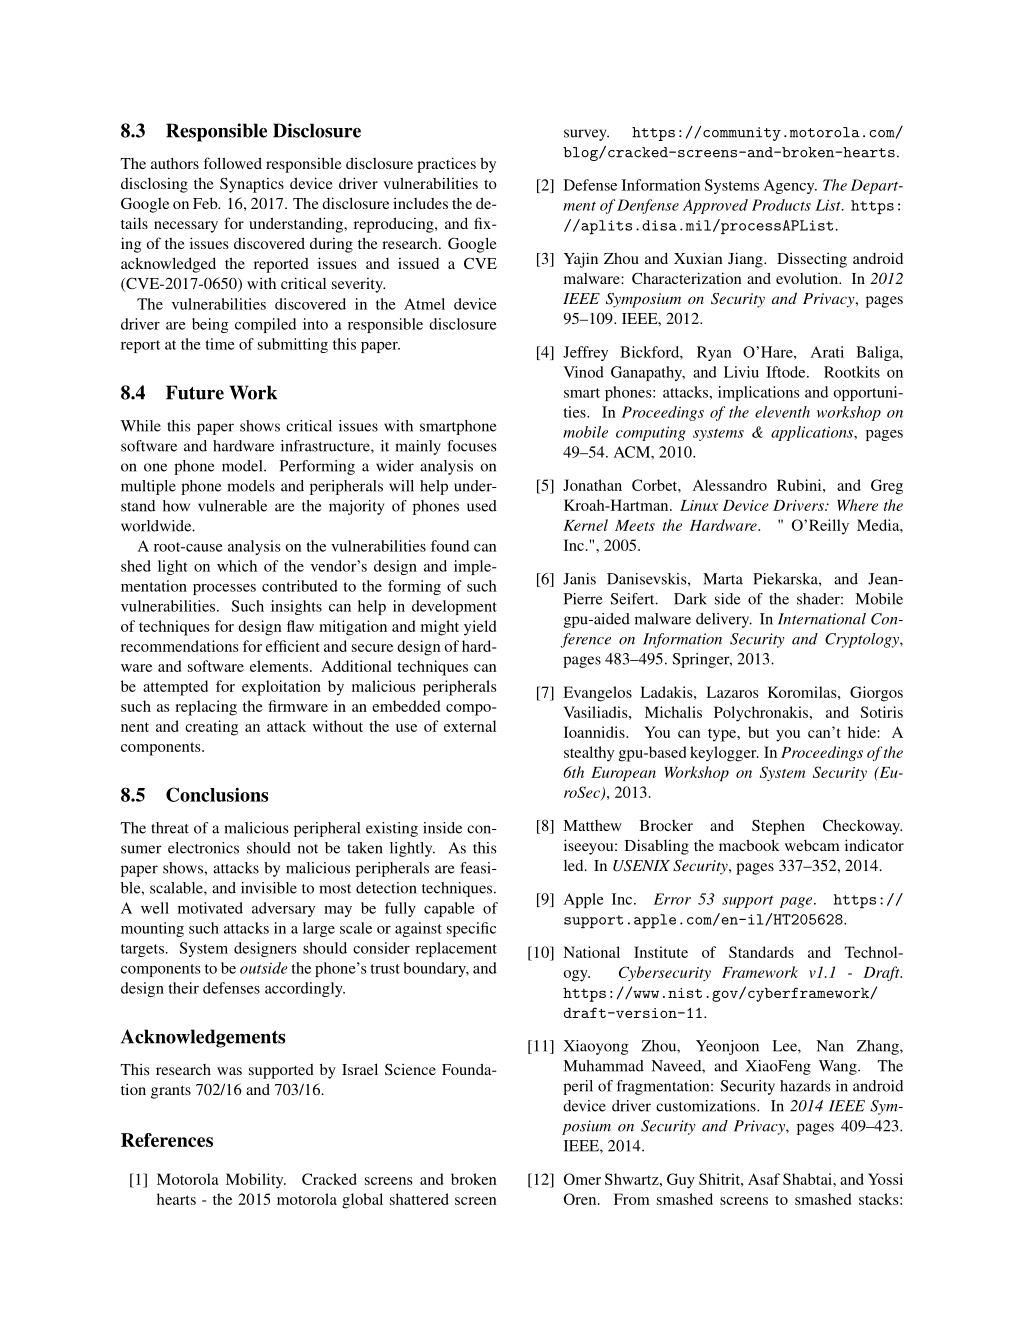 page 11